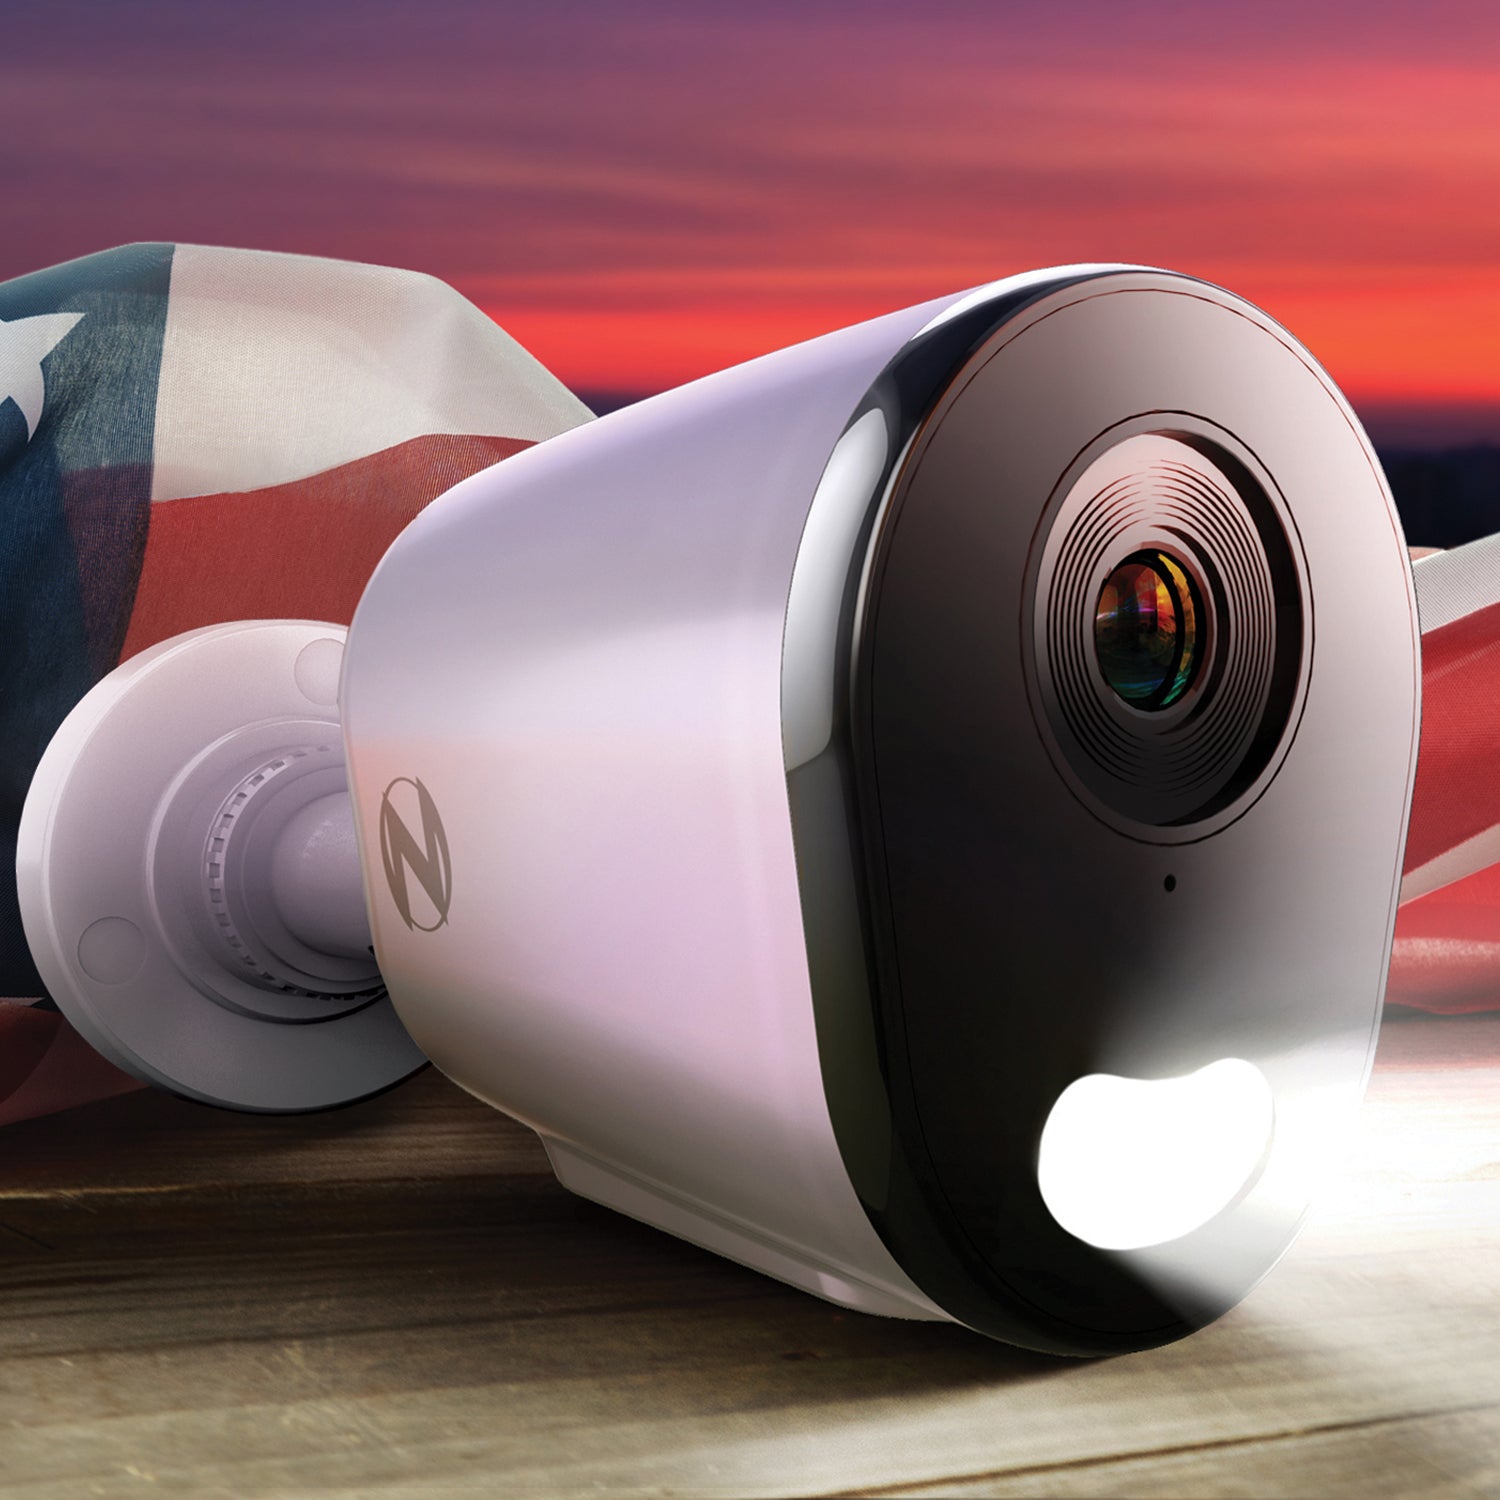 spotlight security camera with American flag